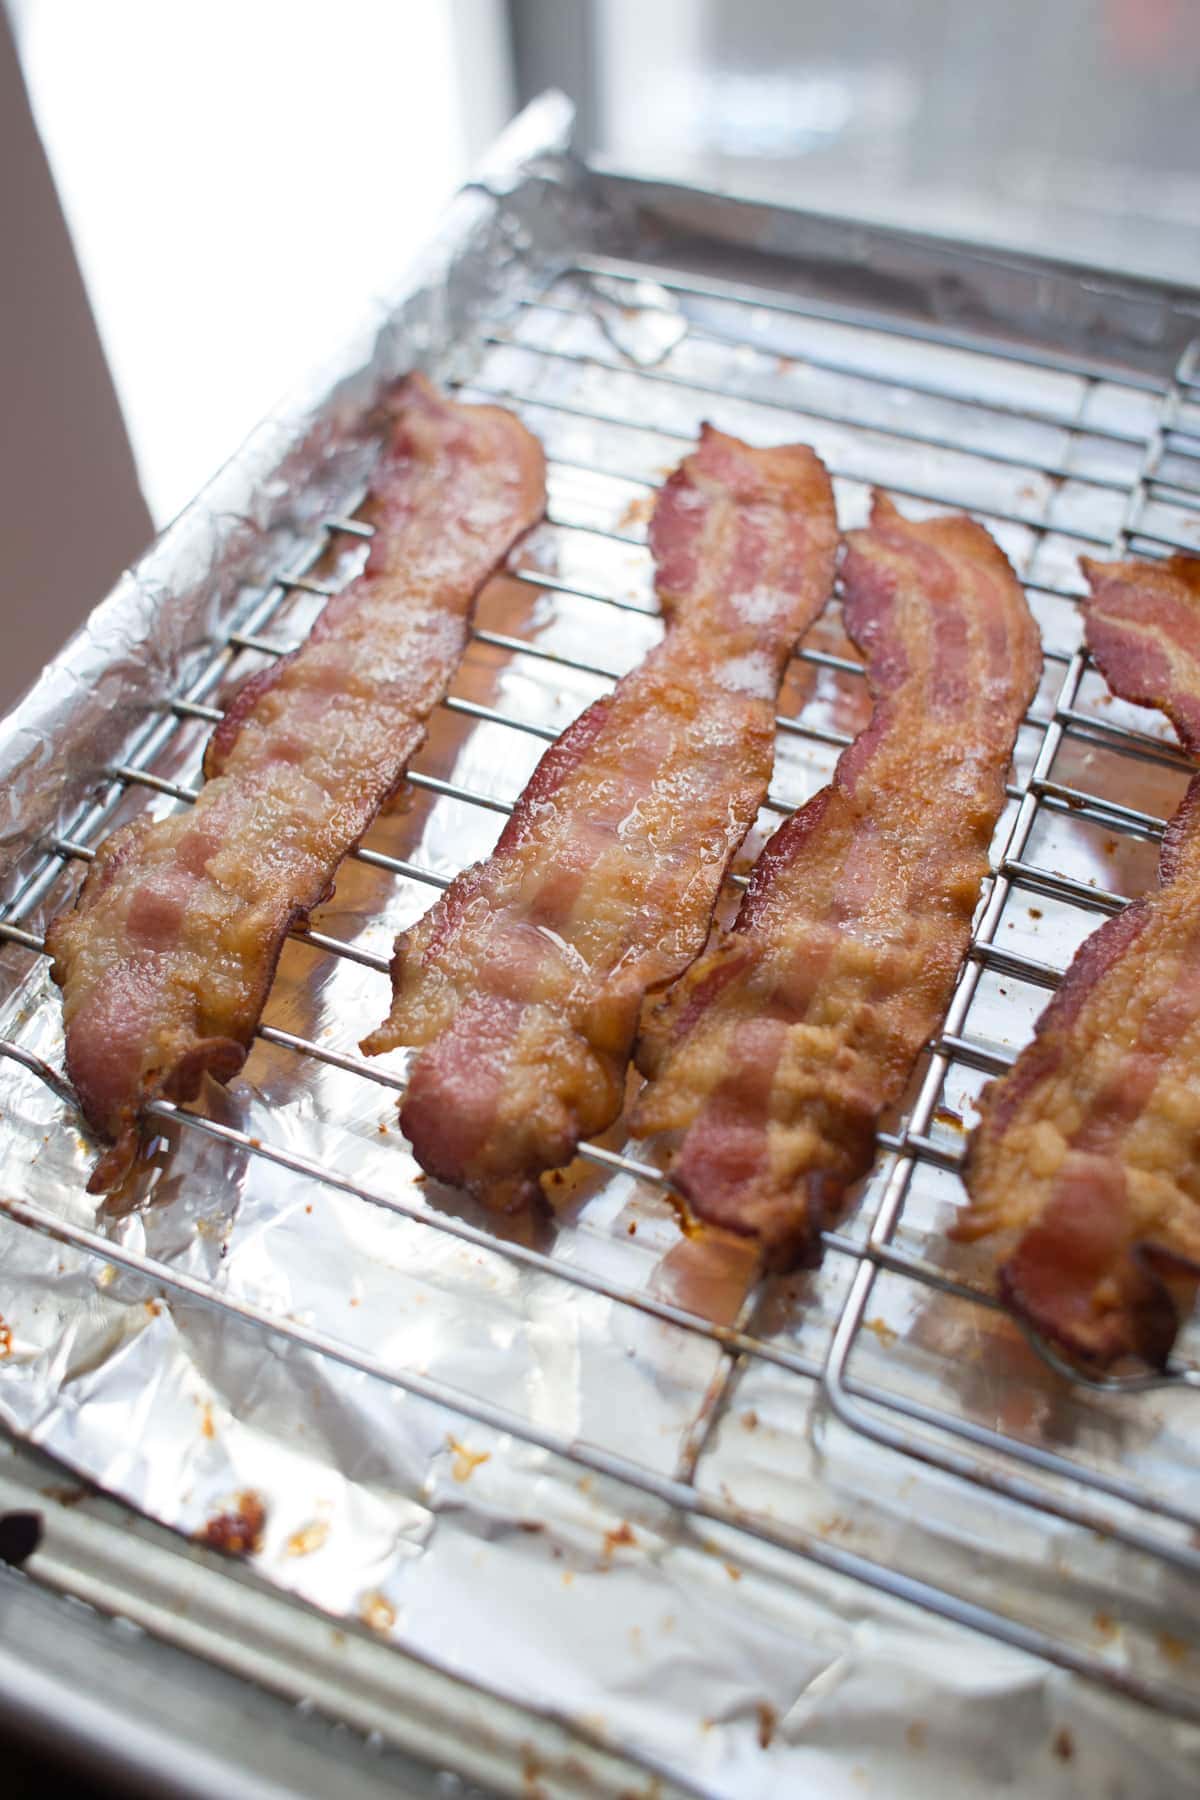 How To Cook Bacon In The Oven Lauren S Latest,50th Birthday Ideas